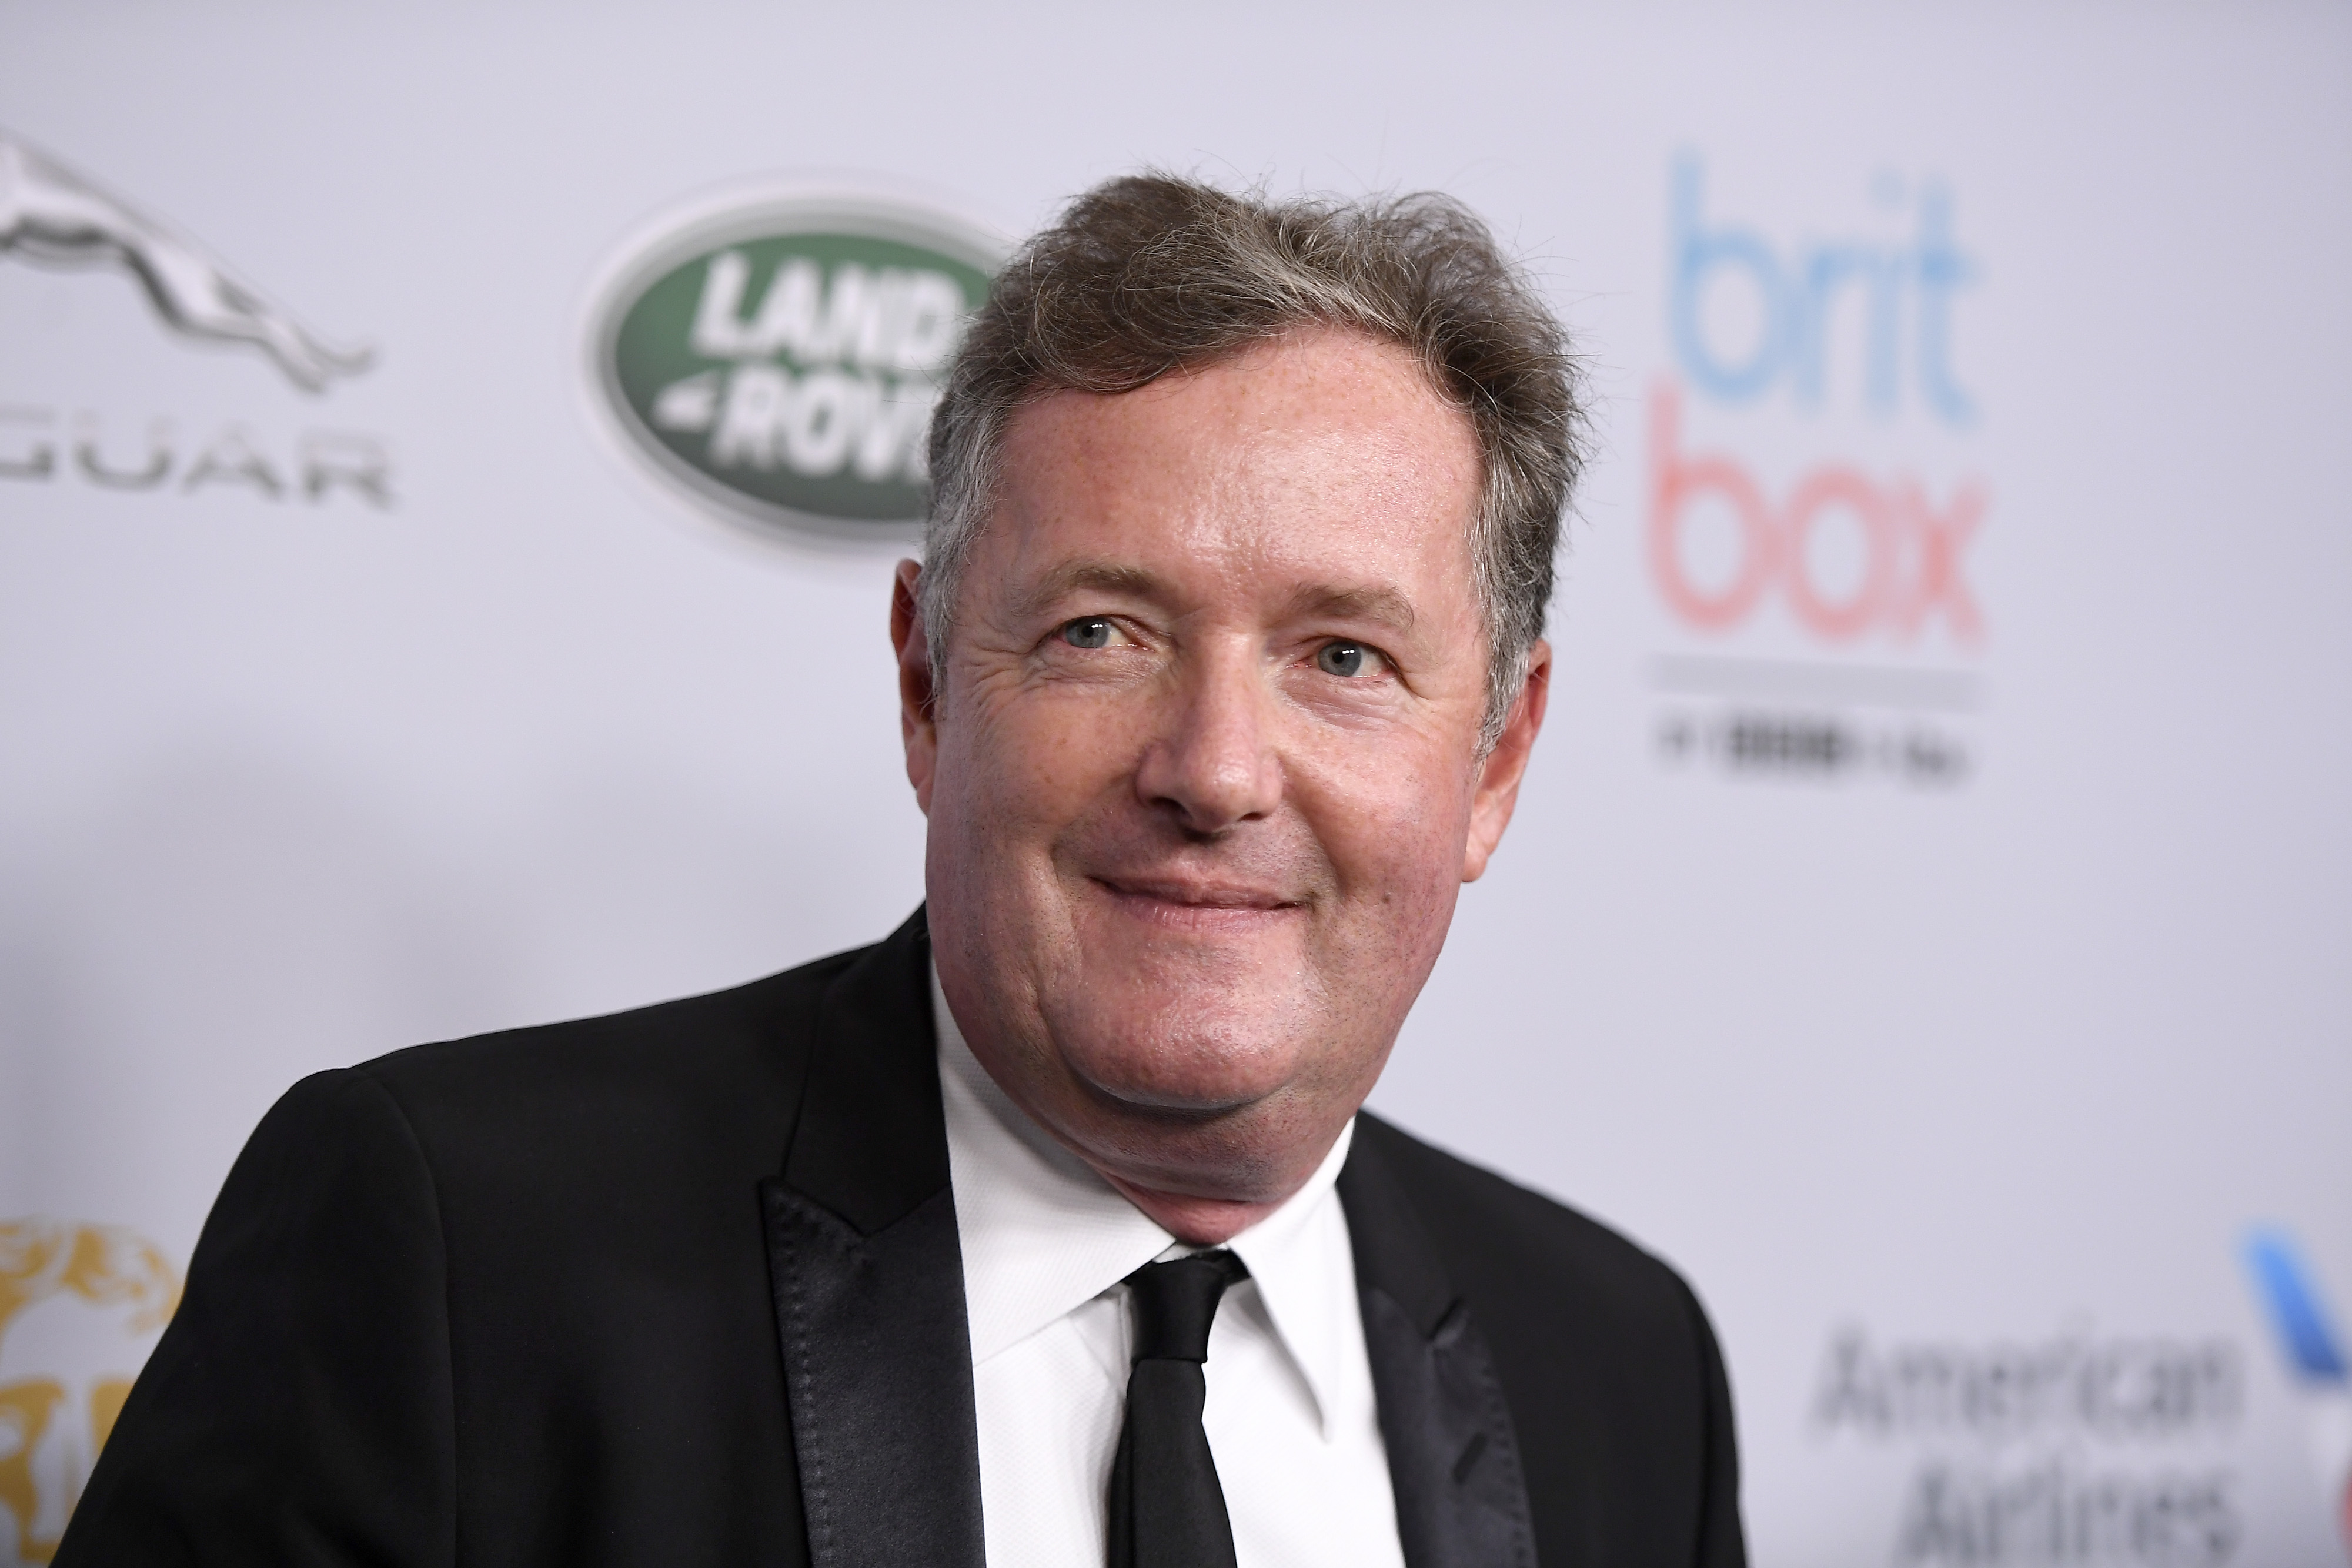  Piers Morgan @ Getty Images